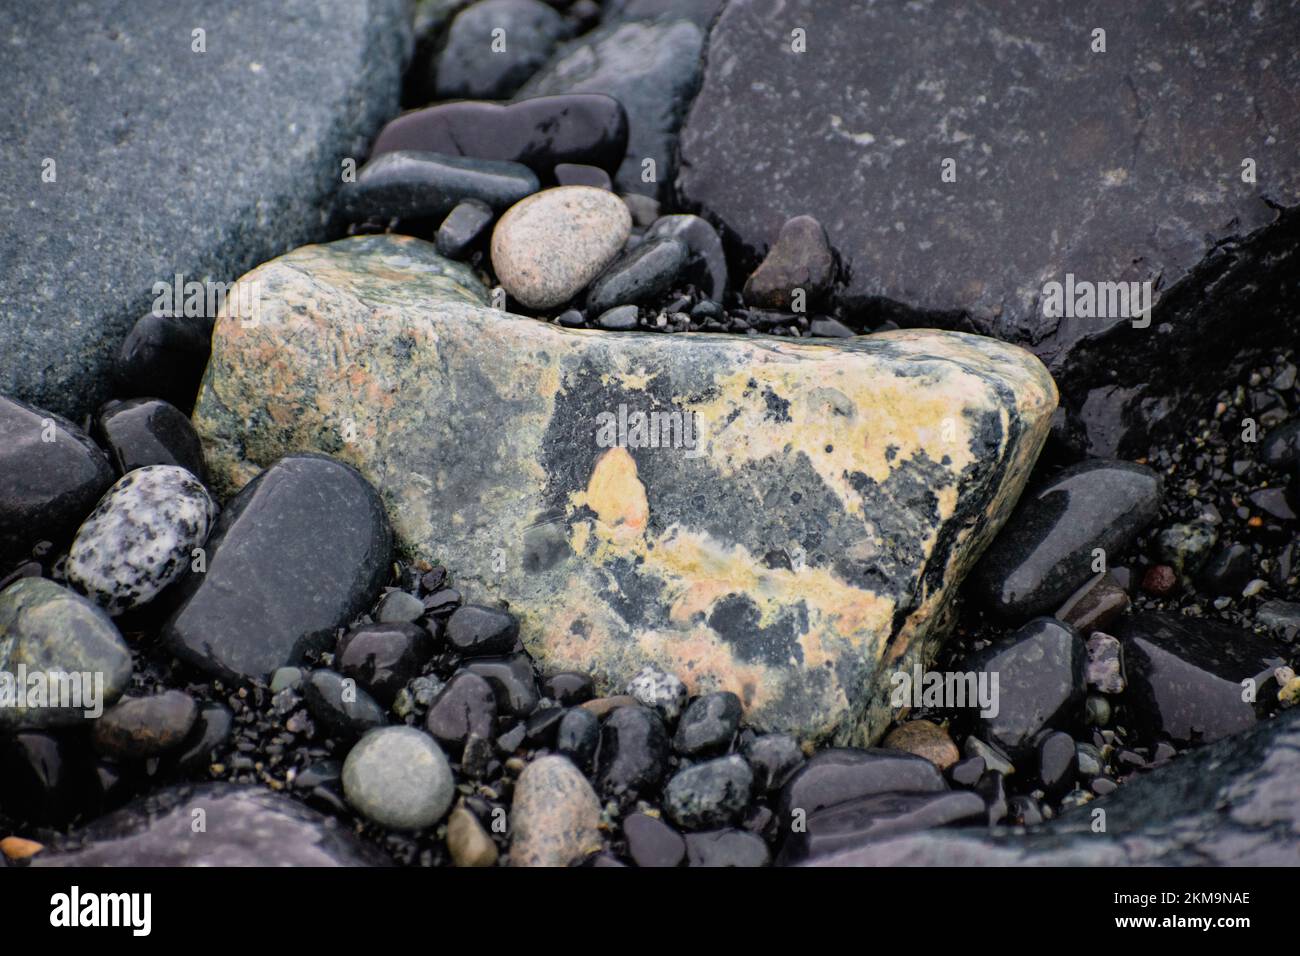 A close-up of a brightly colored rock among dark-colored rocks on an Antarctica beach. Stock Photo